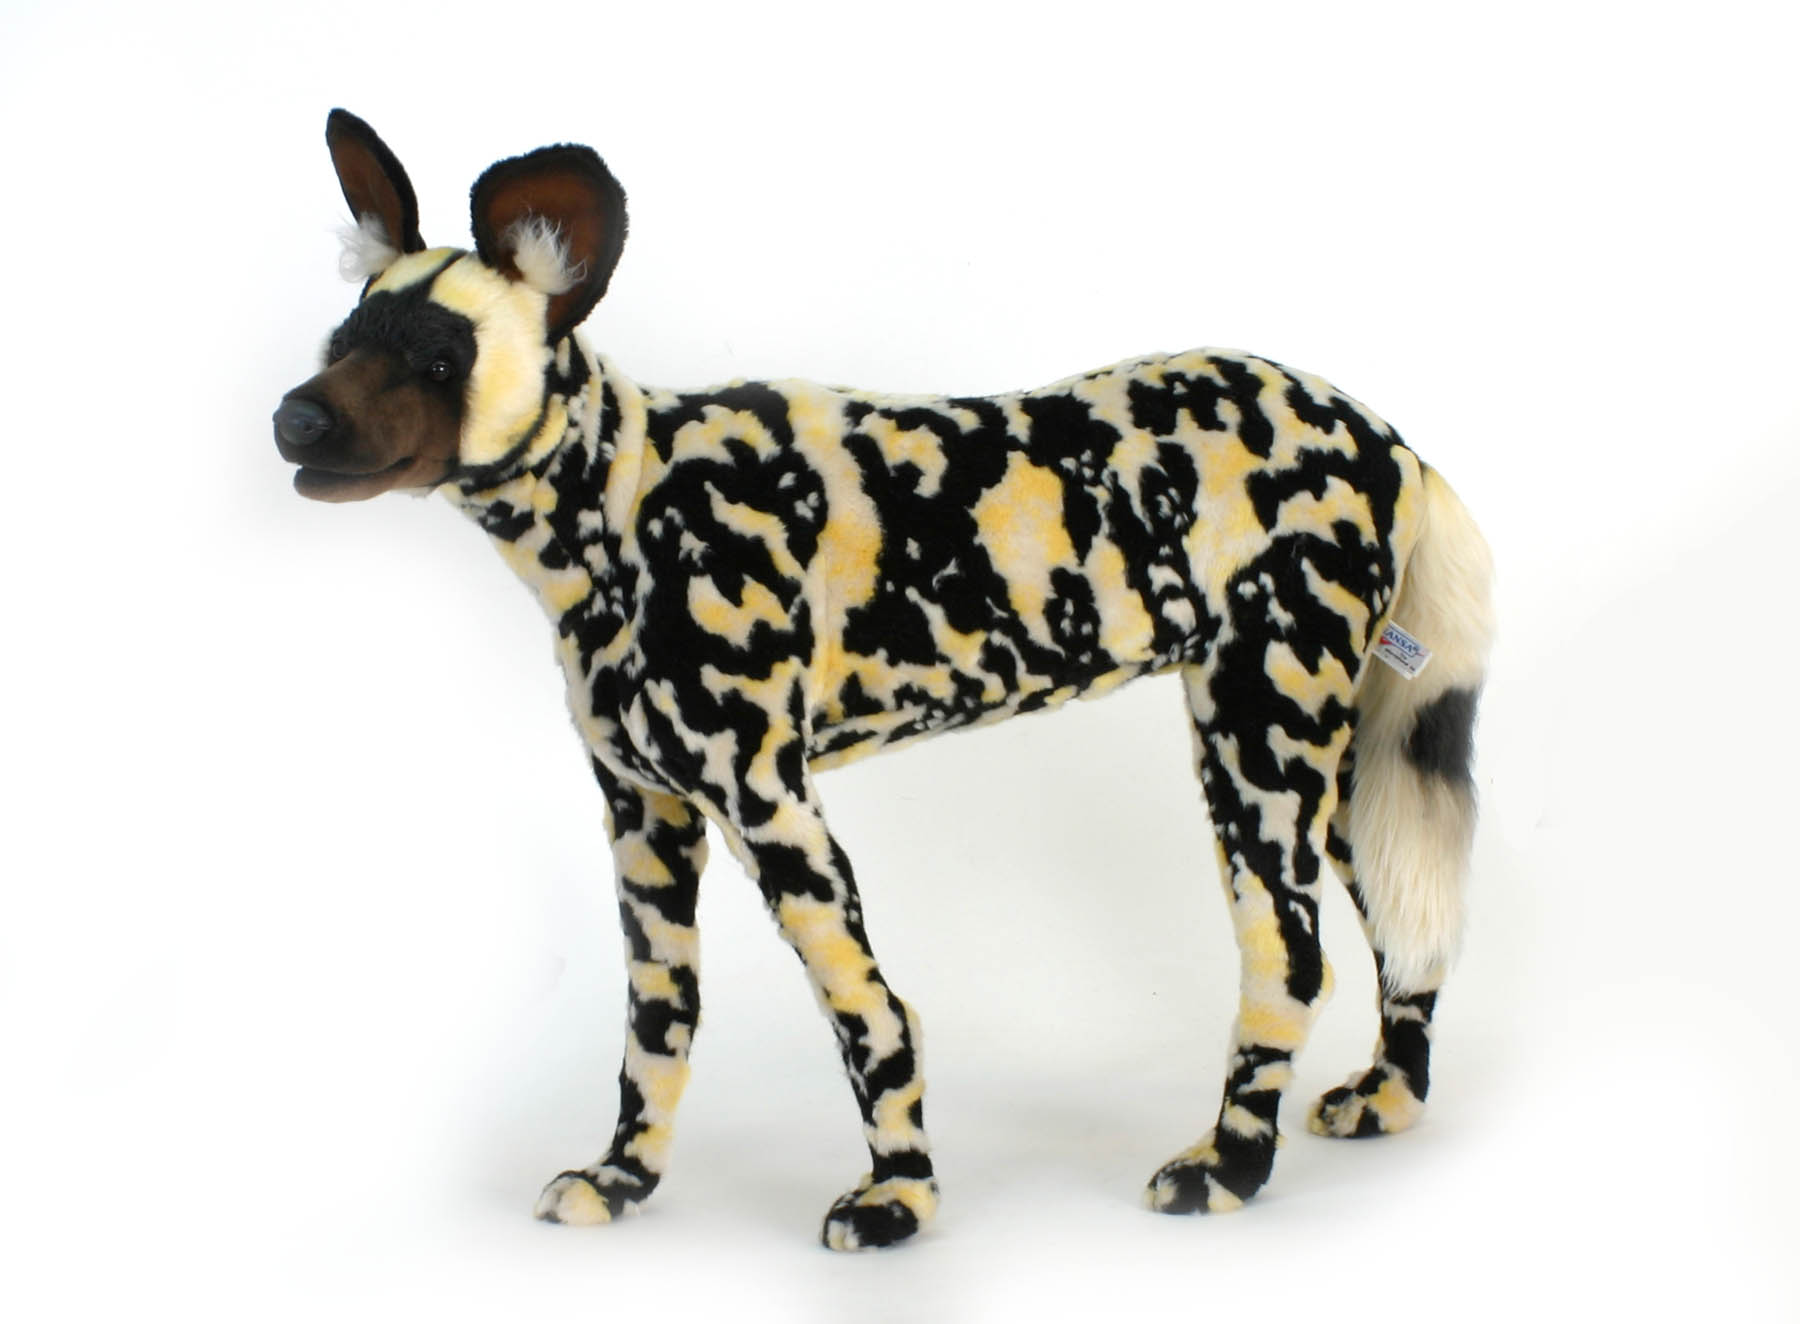 1993 Hansa Painted Hunting Wild Dog 7941 Plush Soft Toy Sold by Lincrafts Est 